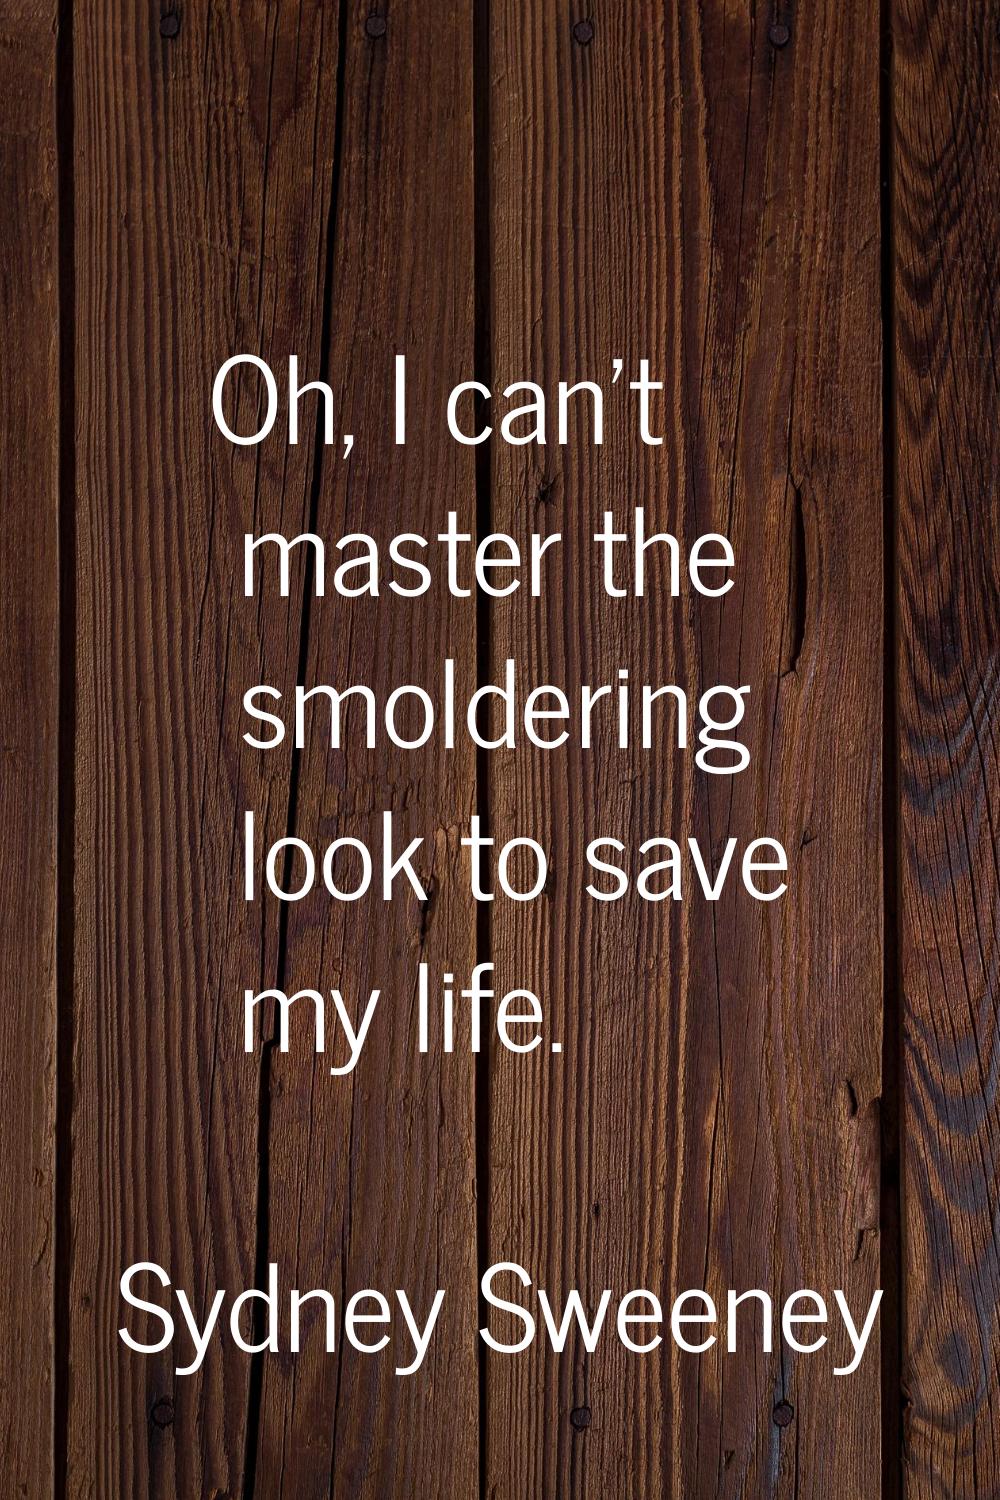 Oh, I can't master the smoldering look to save my life.